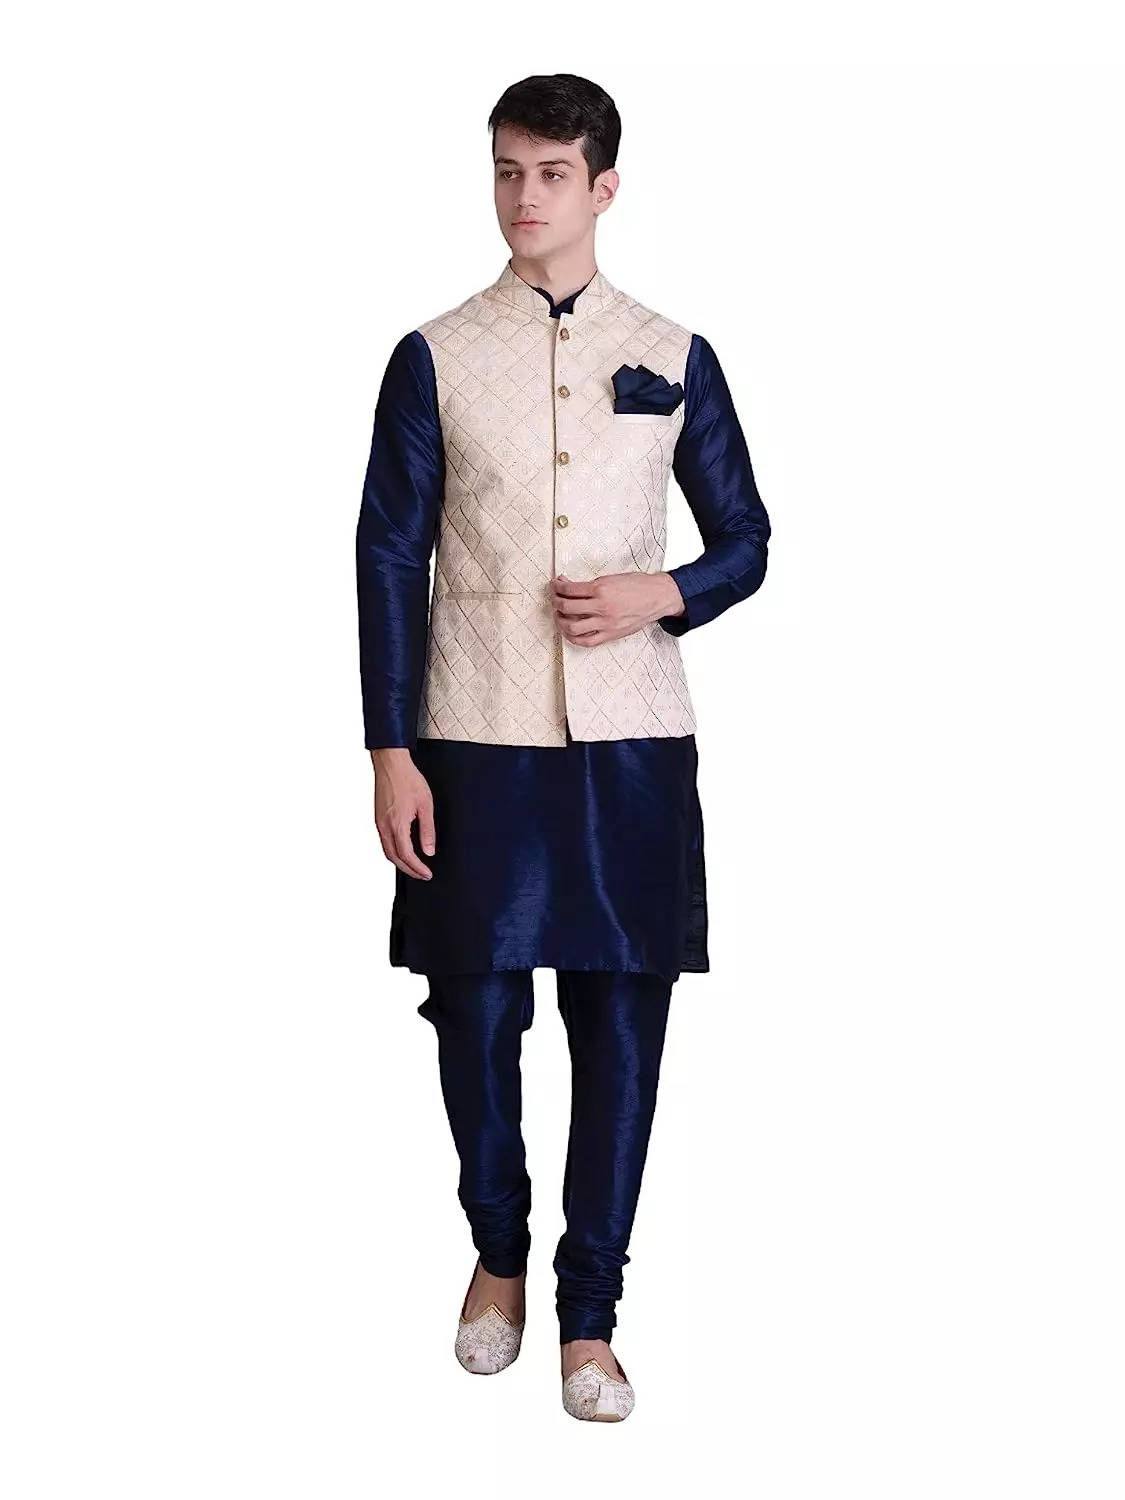 Men's Festival Kurta Set: A Combination of Traditional and Stylish Designs